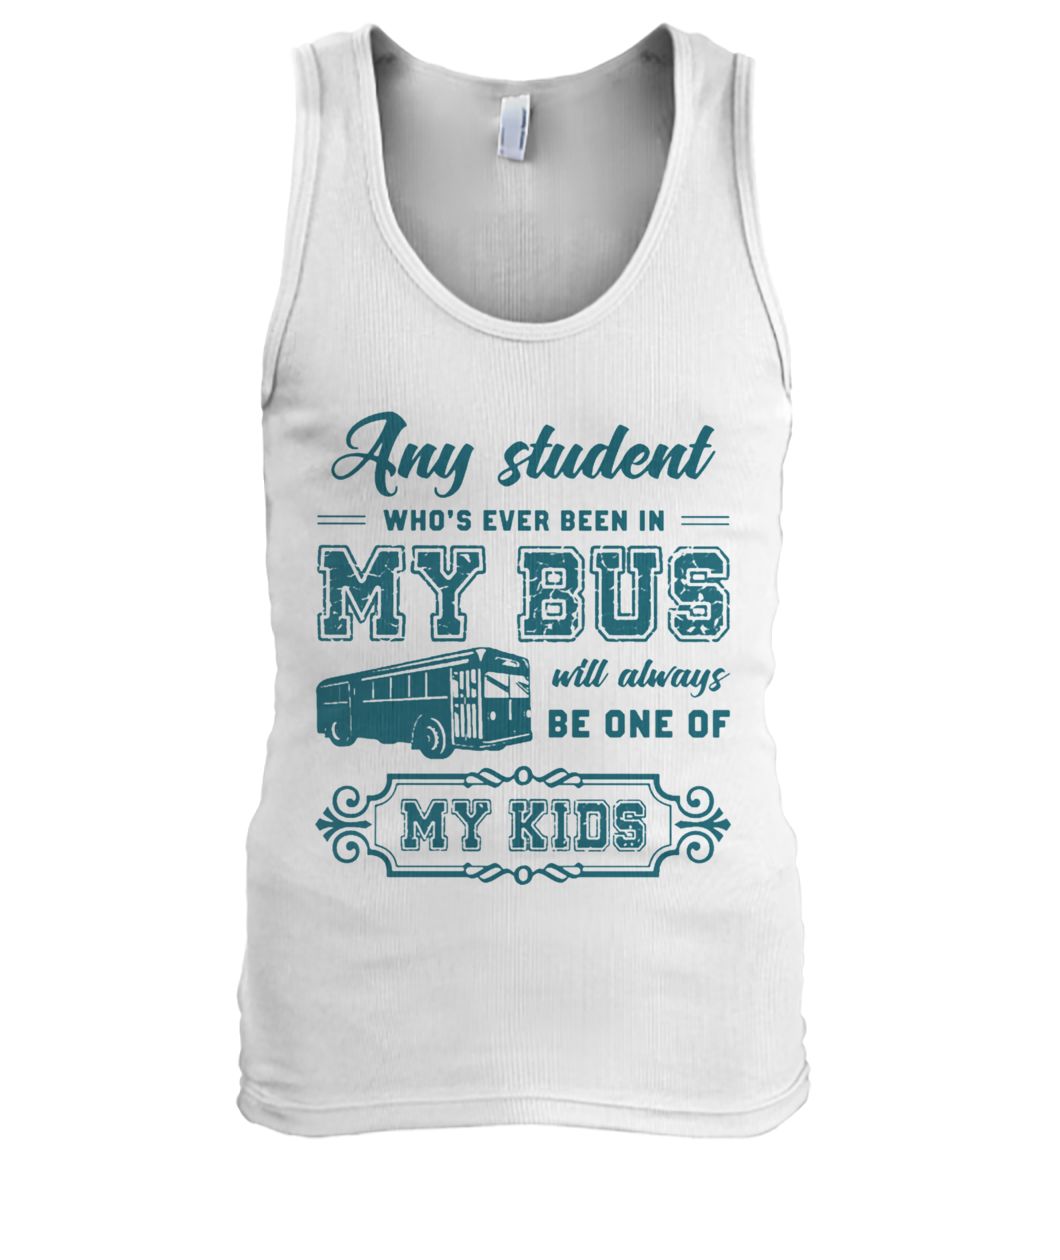 Any student who's ever been in my bus will always be one of my kids men's tank top